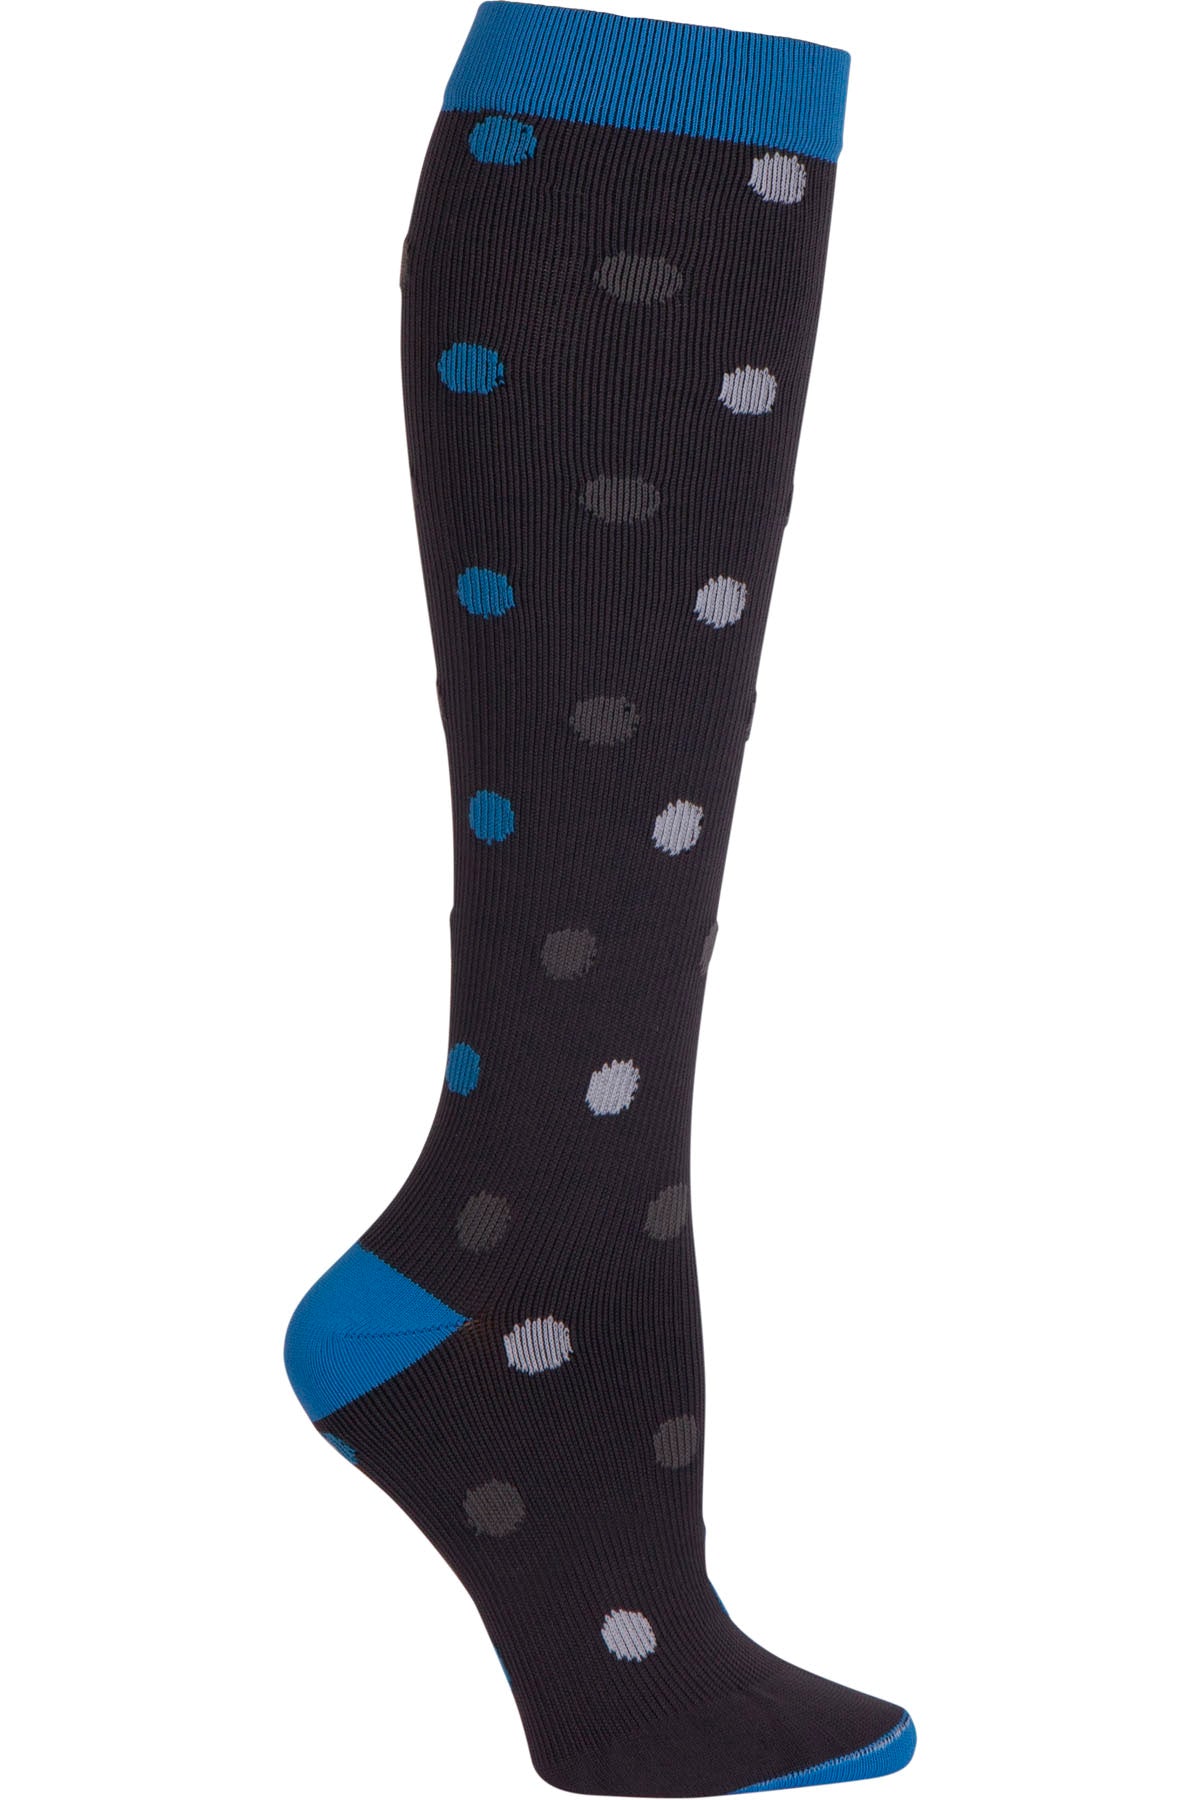 Cherokee Mens Mild Compression Socks 8-12 mmHg in Robust Dots at Parker's Clothing and Shoes.